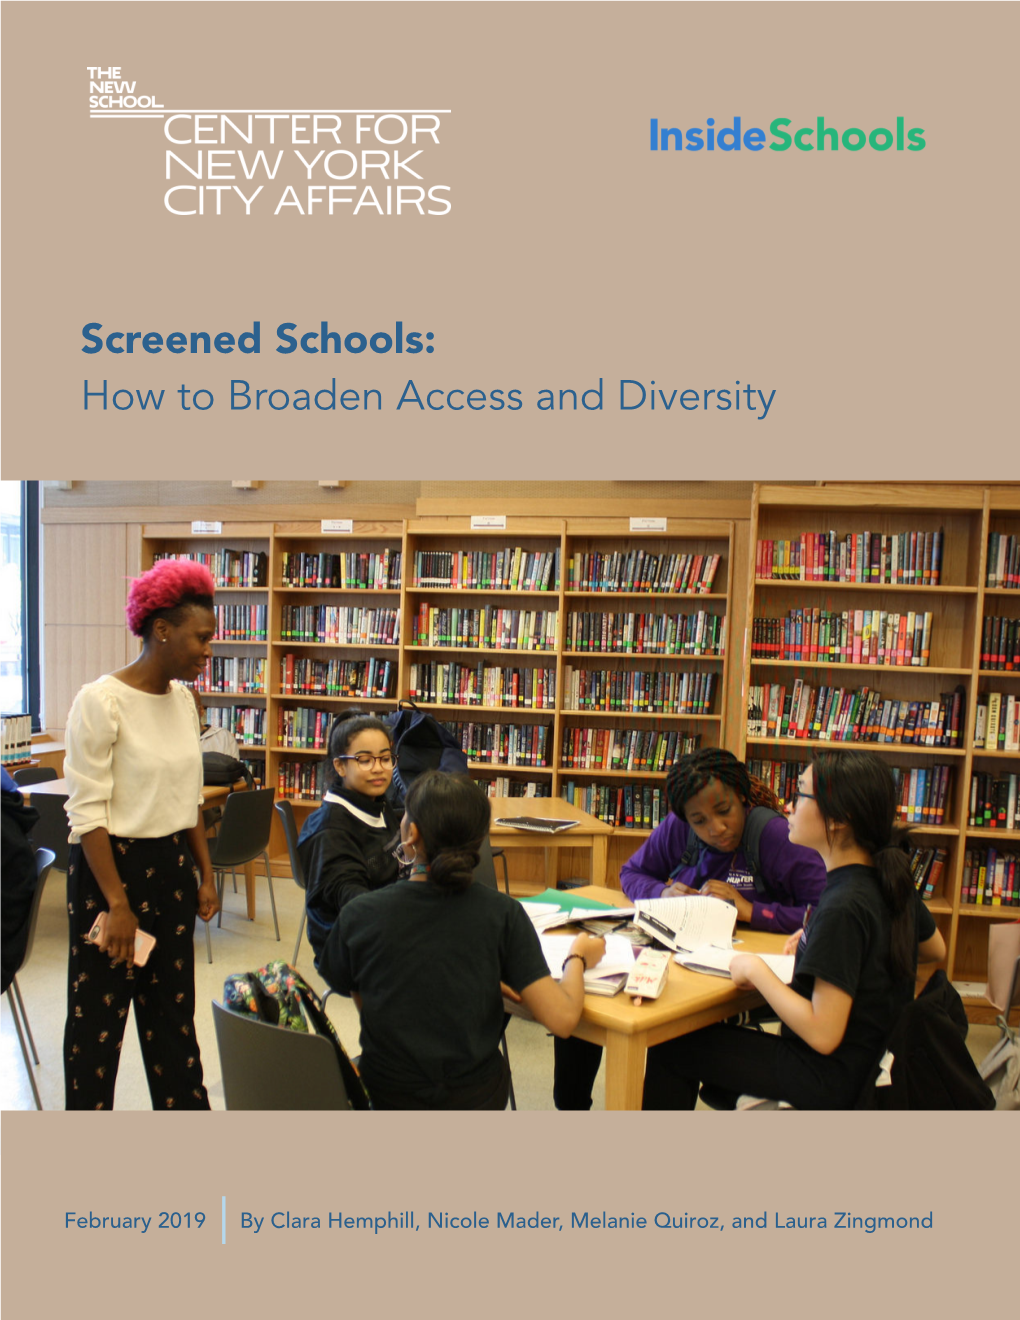 Screened Schools: How to Broaden Access and Diversity